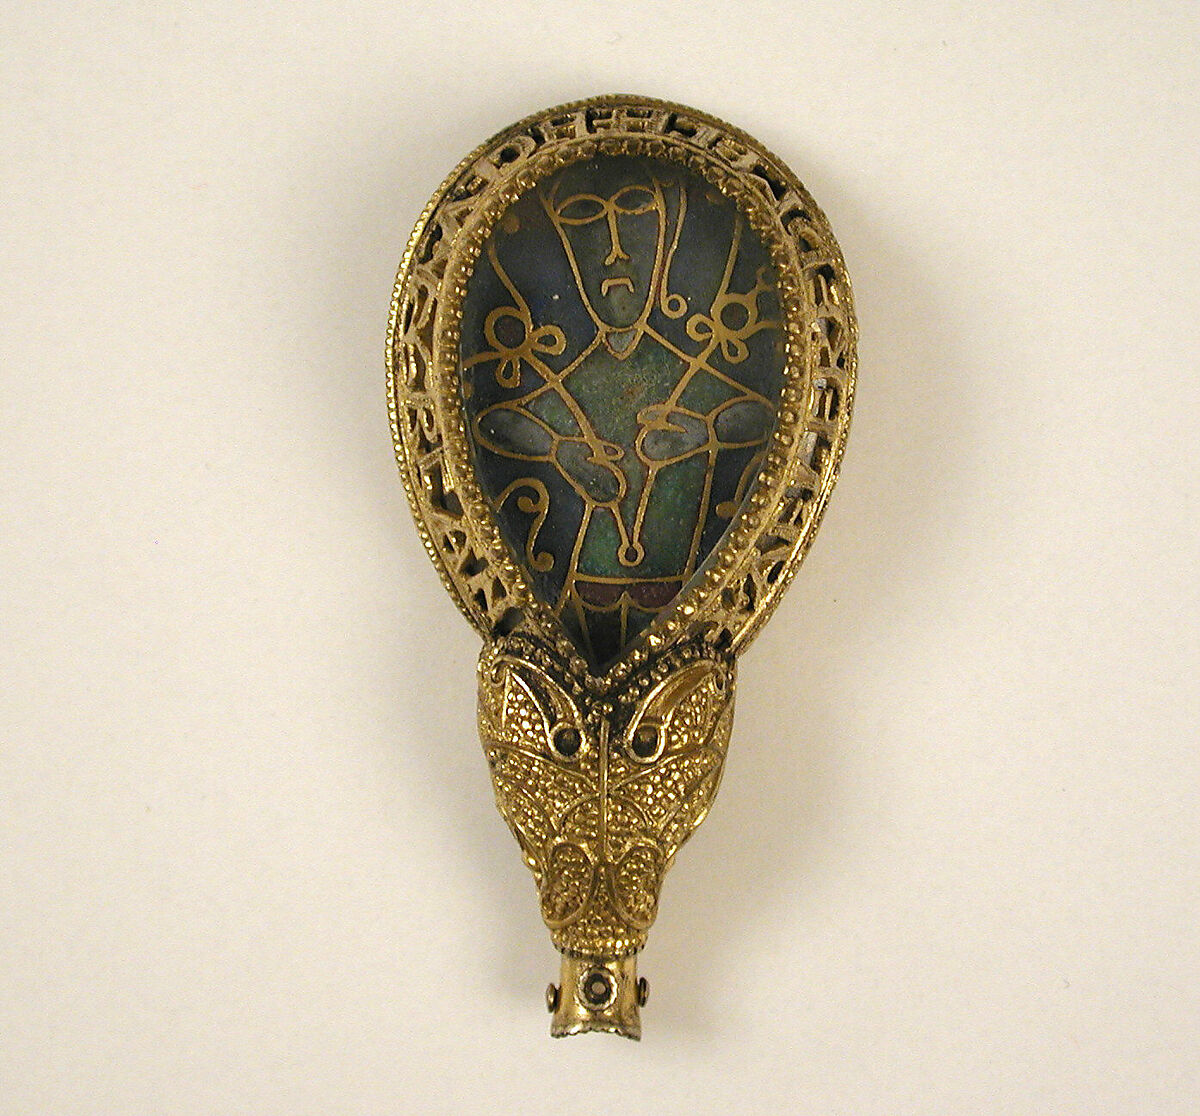 Pendant Jewel with Alfred the Great, Gold, enamel, rock crystal, Saxon 